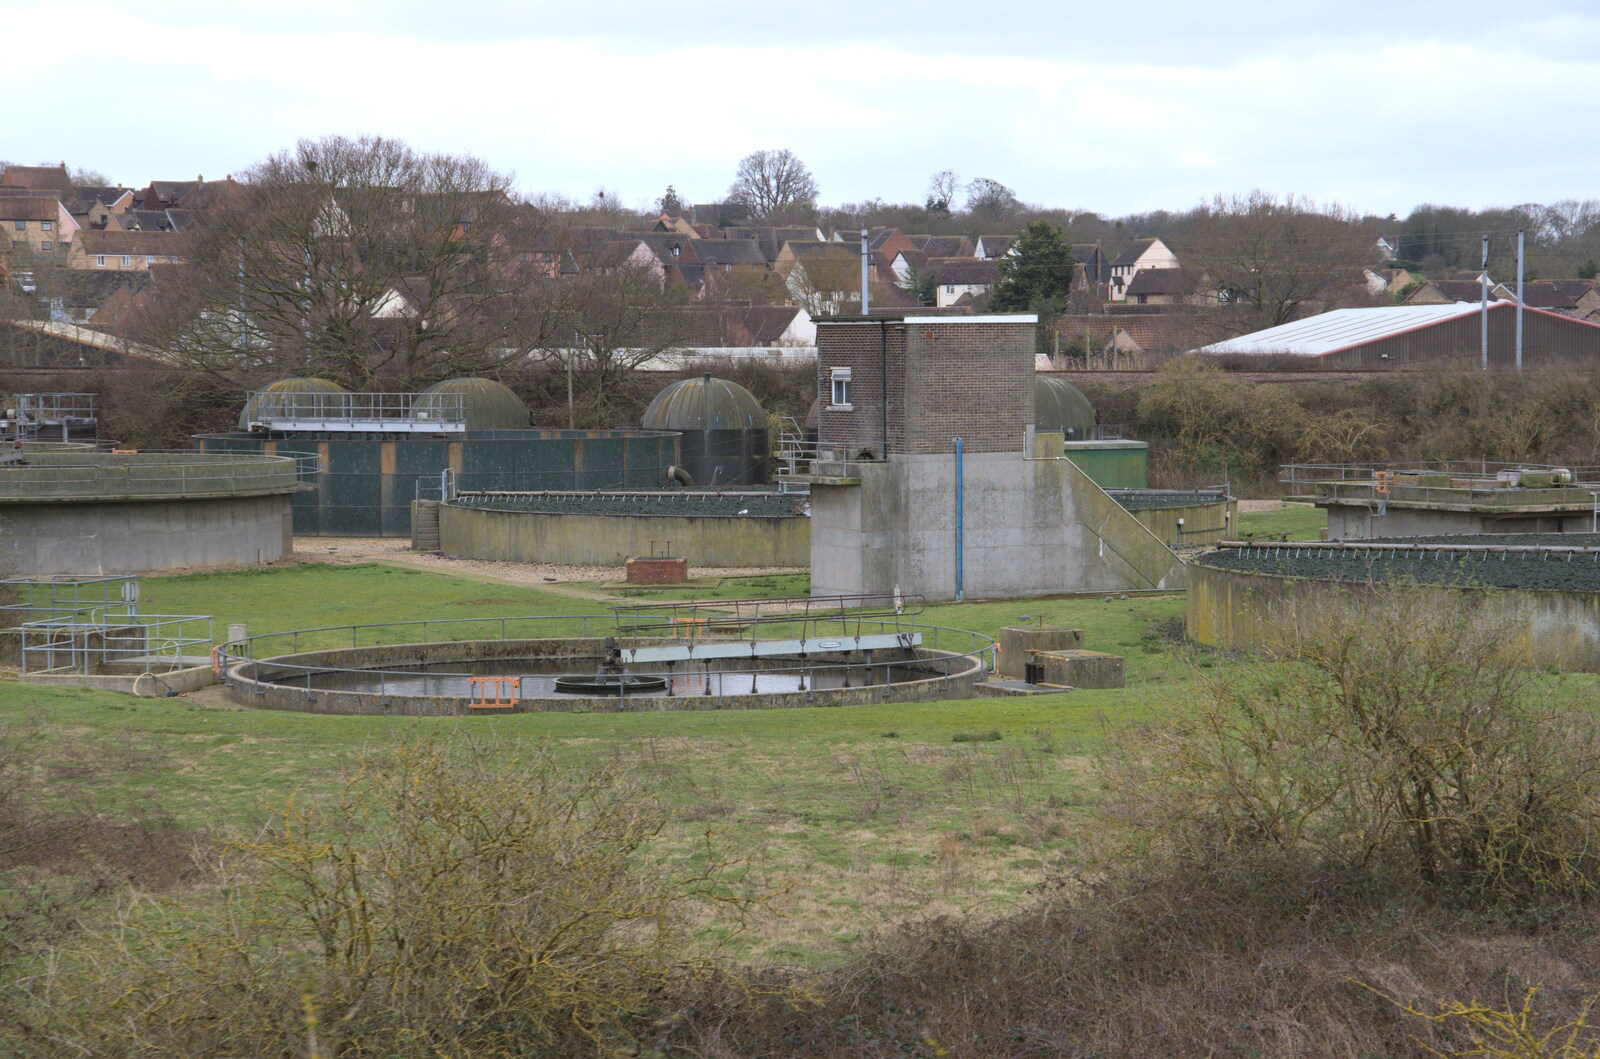 The Manningtree sewage works from A SwiftKey Memorial Service, Covent Garden, London  - 13th March 2020